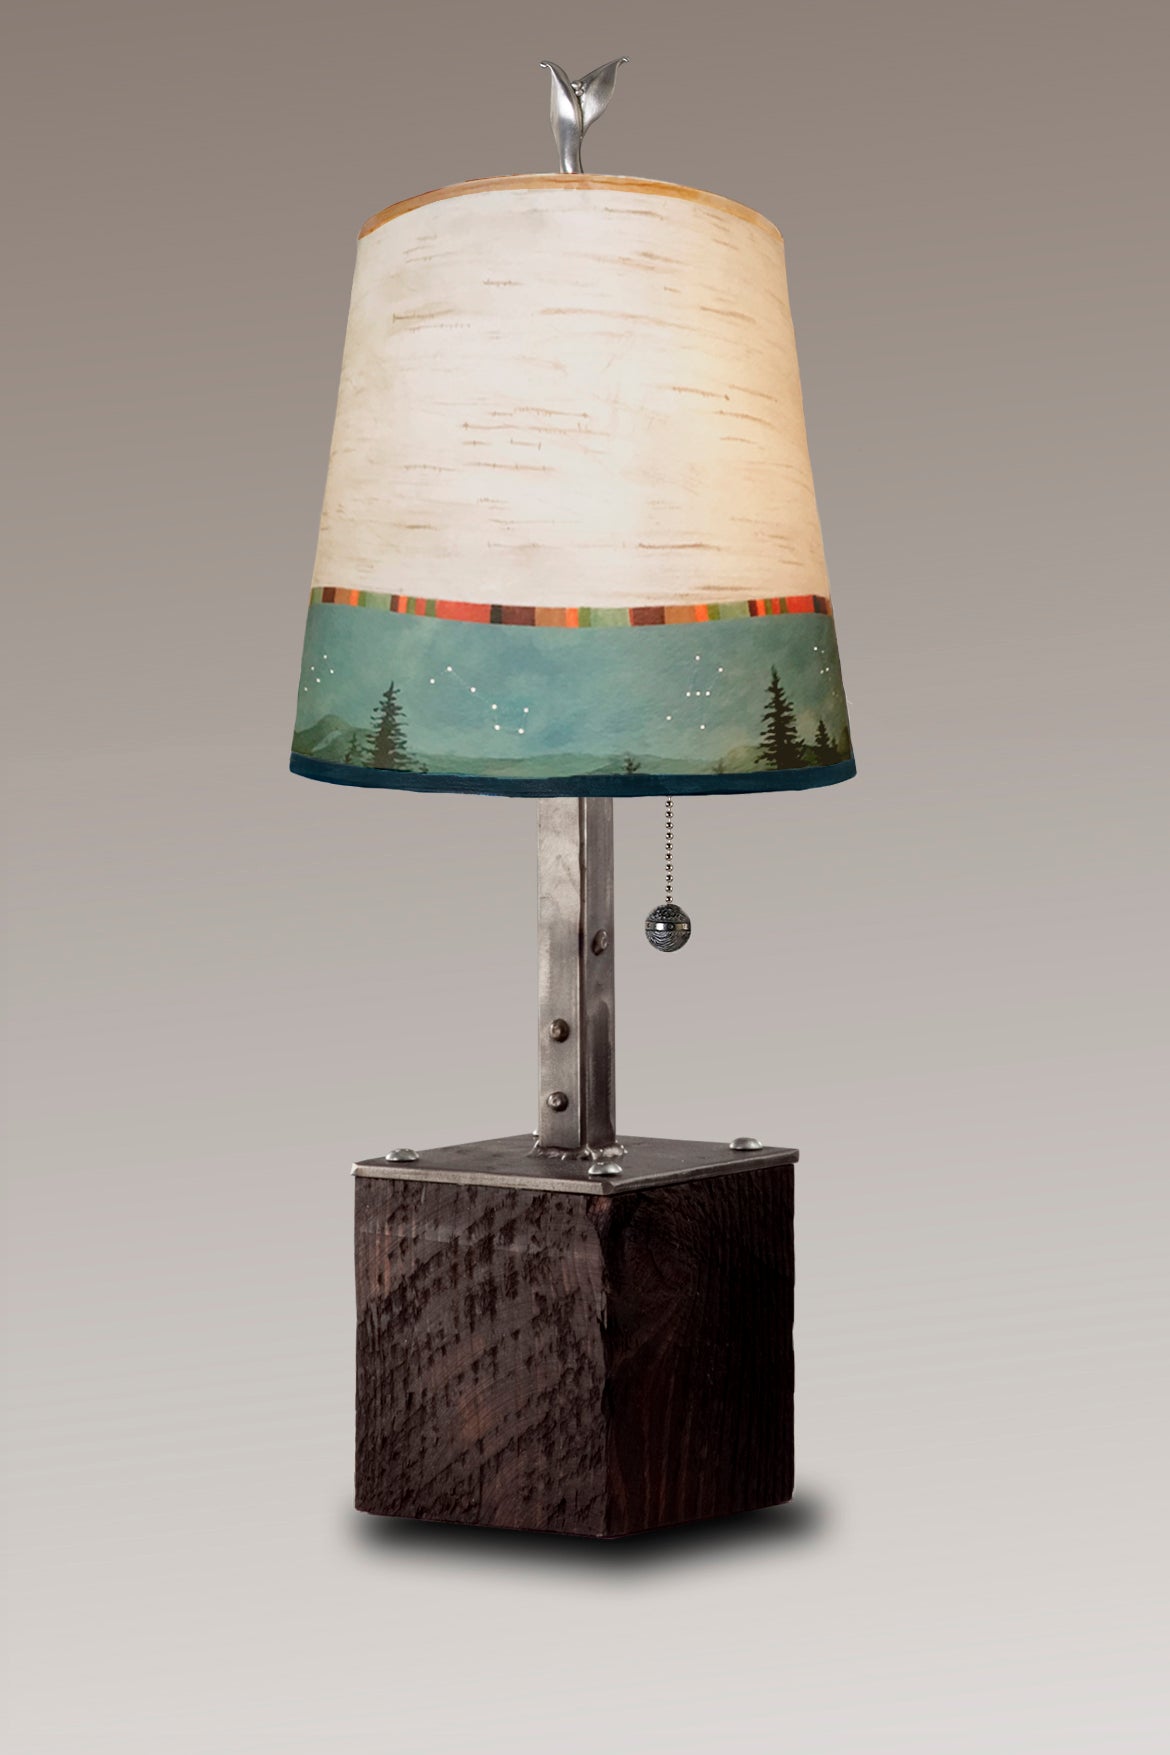 Steel Table Lamp on Reclaimed Wood with Small Drum Shade in Birch Midnight